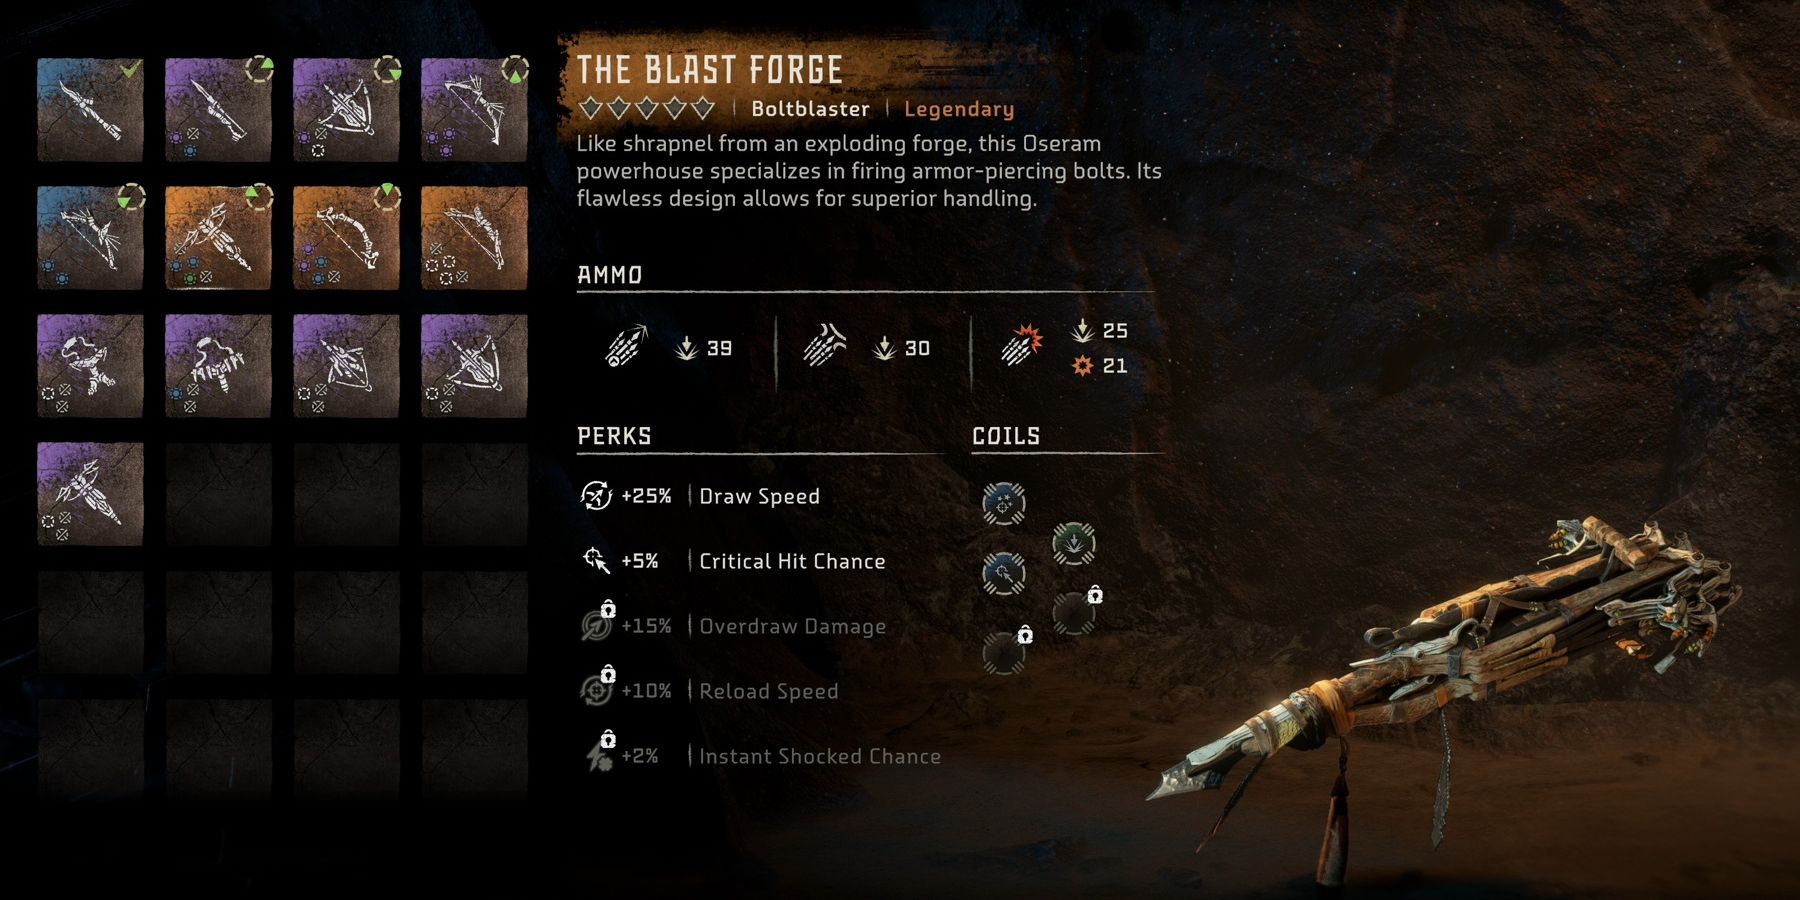 Menu screen showing the Blast Forge legendary weapon from Horizon Forbidden West.